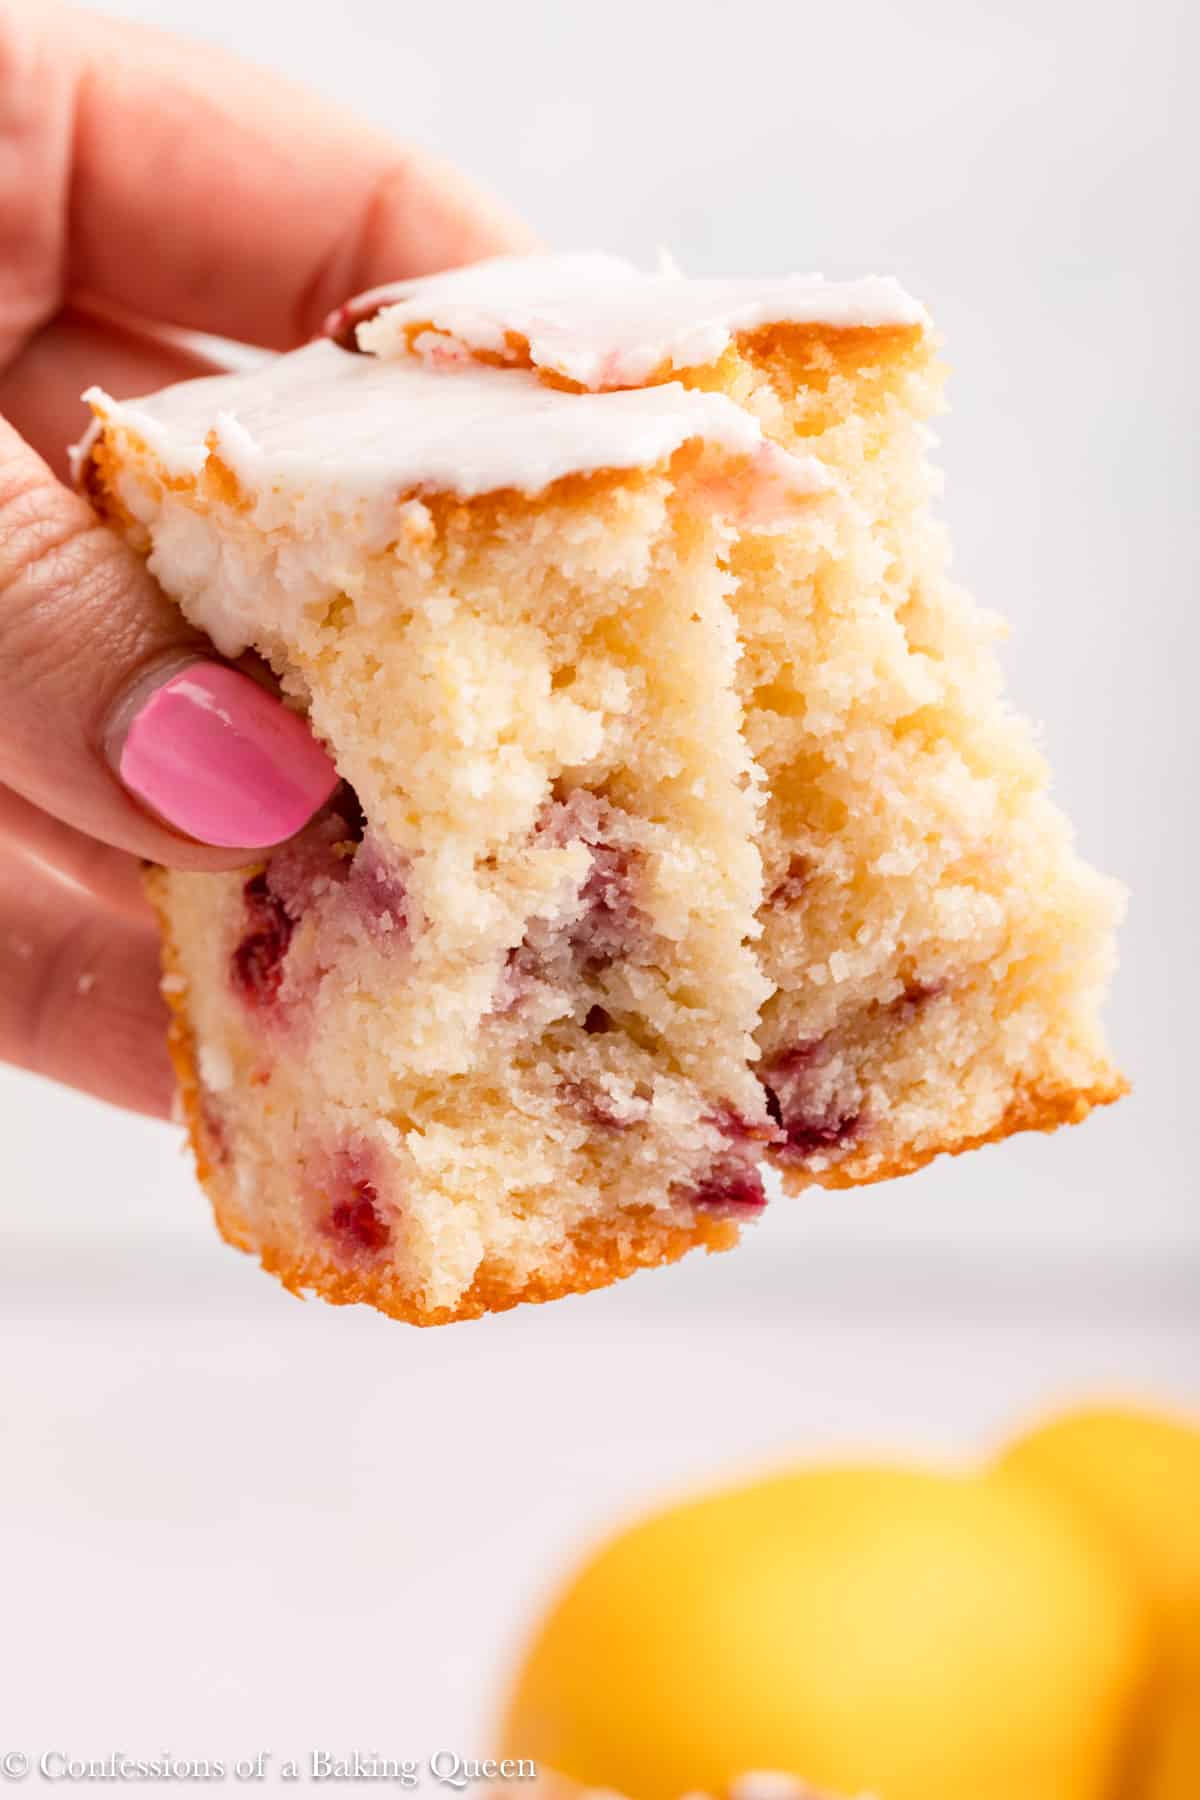 A hand holding a piece of raspberry lemon loaf cake with a bite taken out of it.